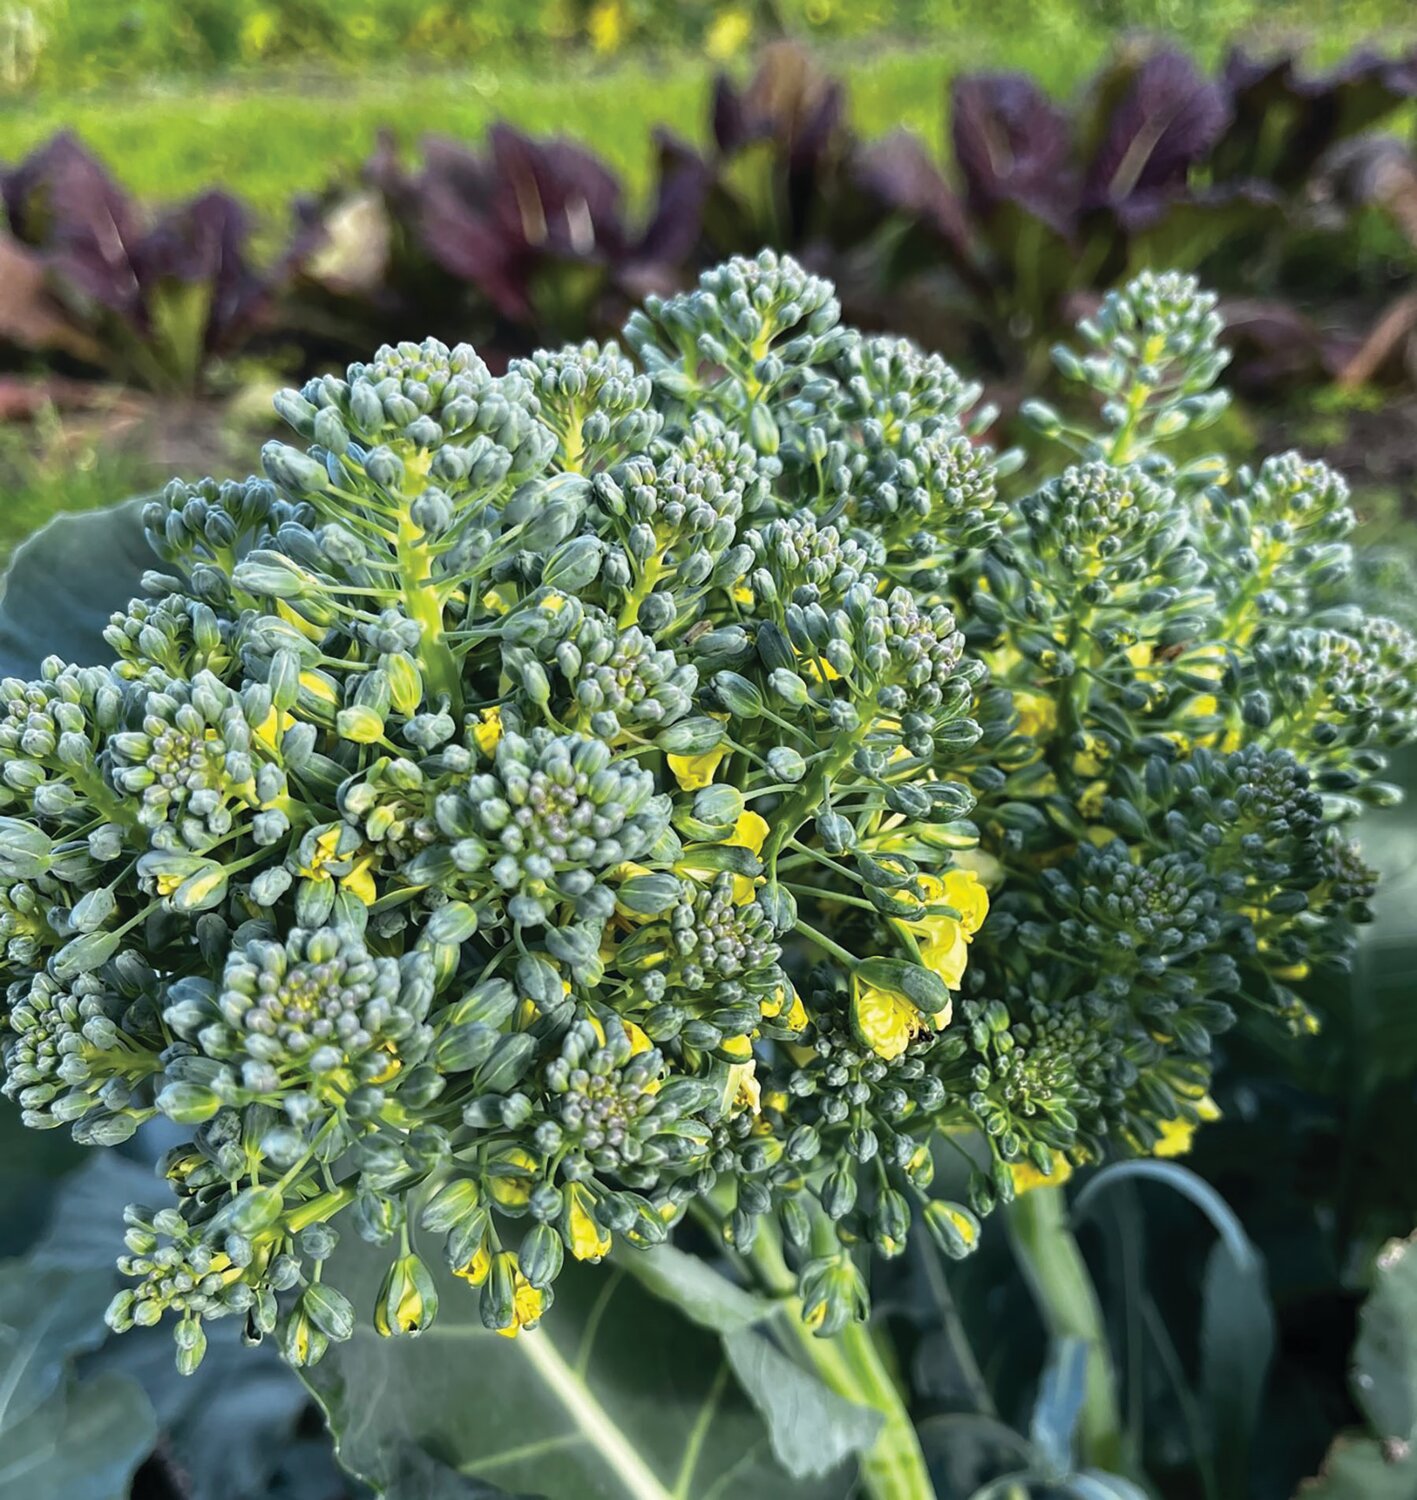 While broccoli heads are still on the plant, they develop into flower bunches.